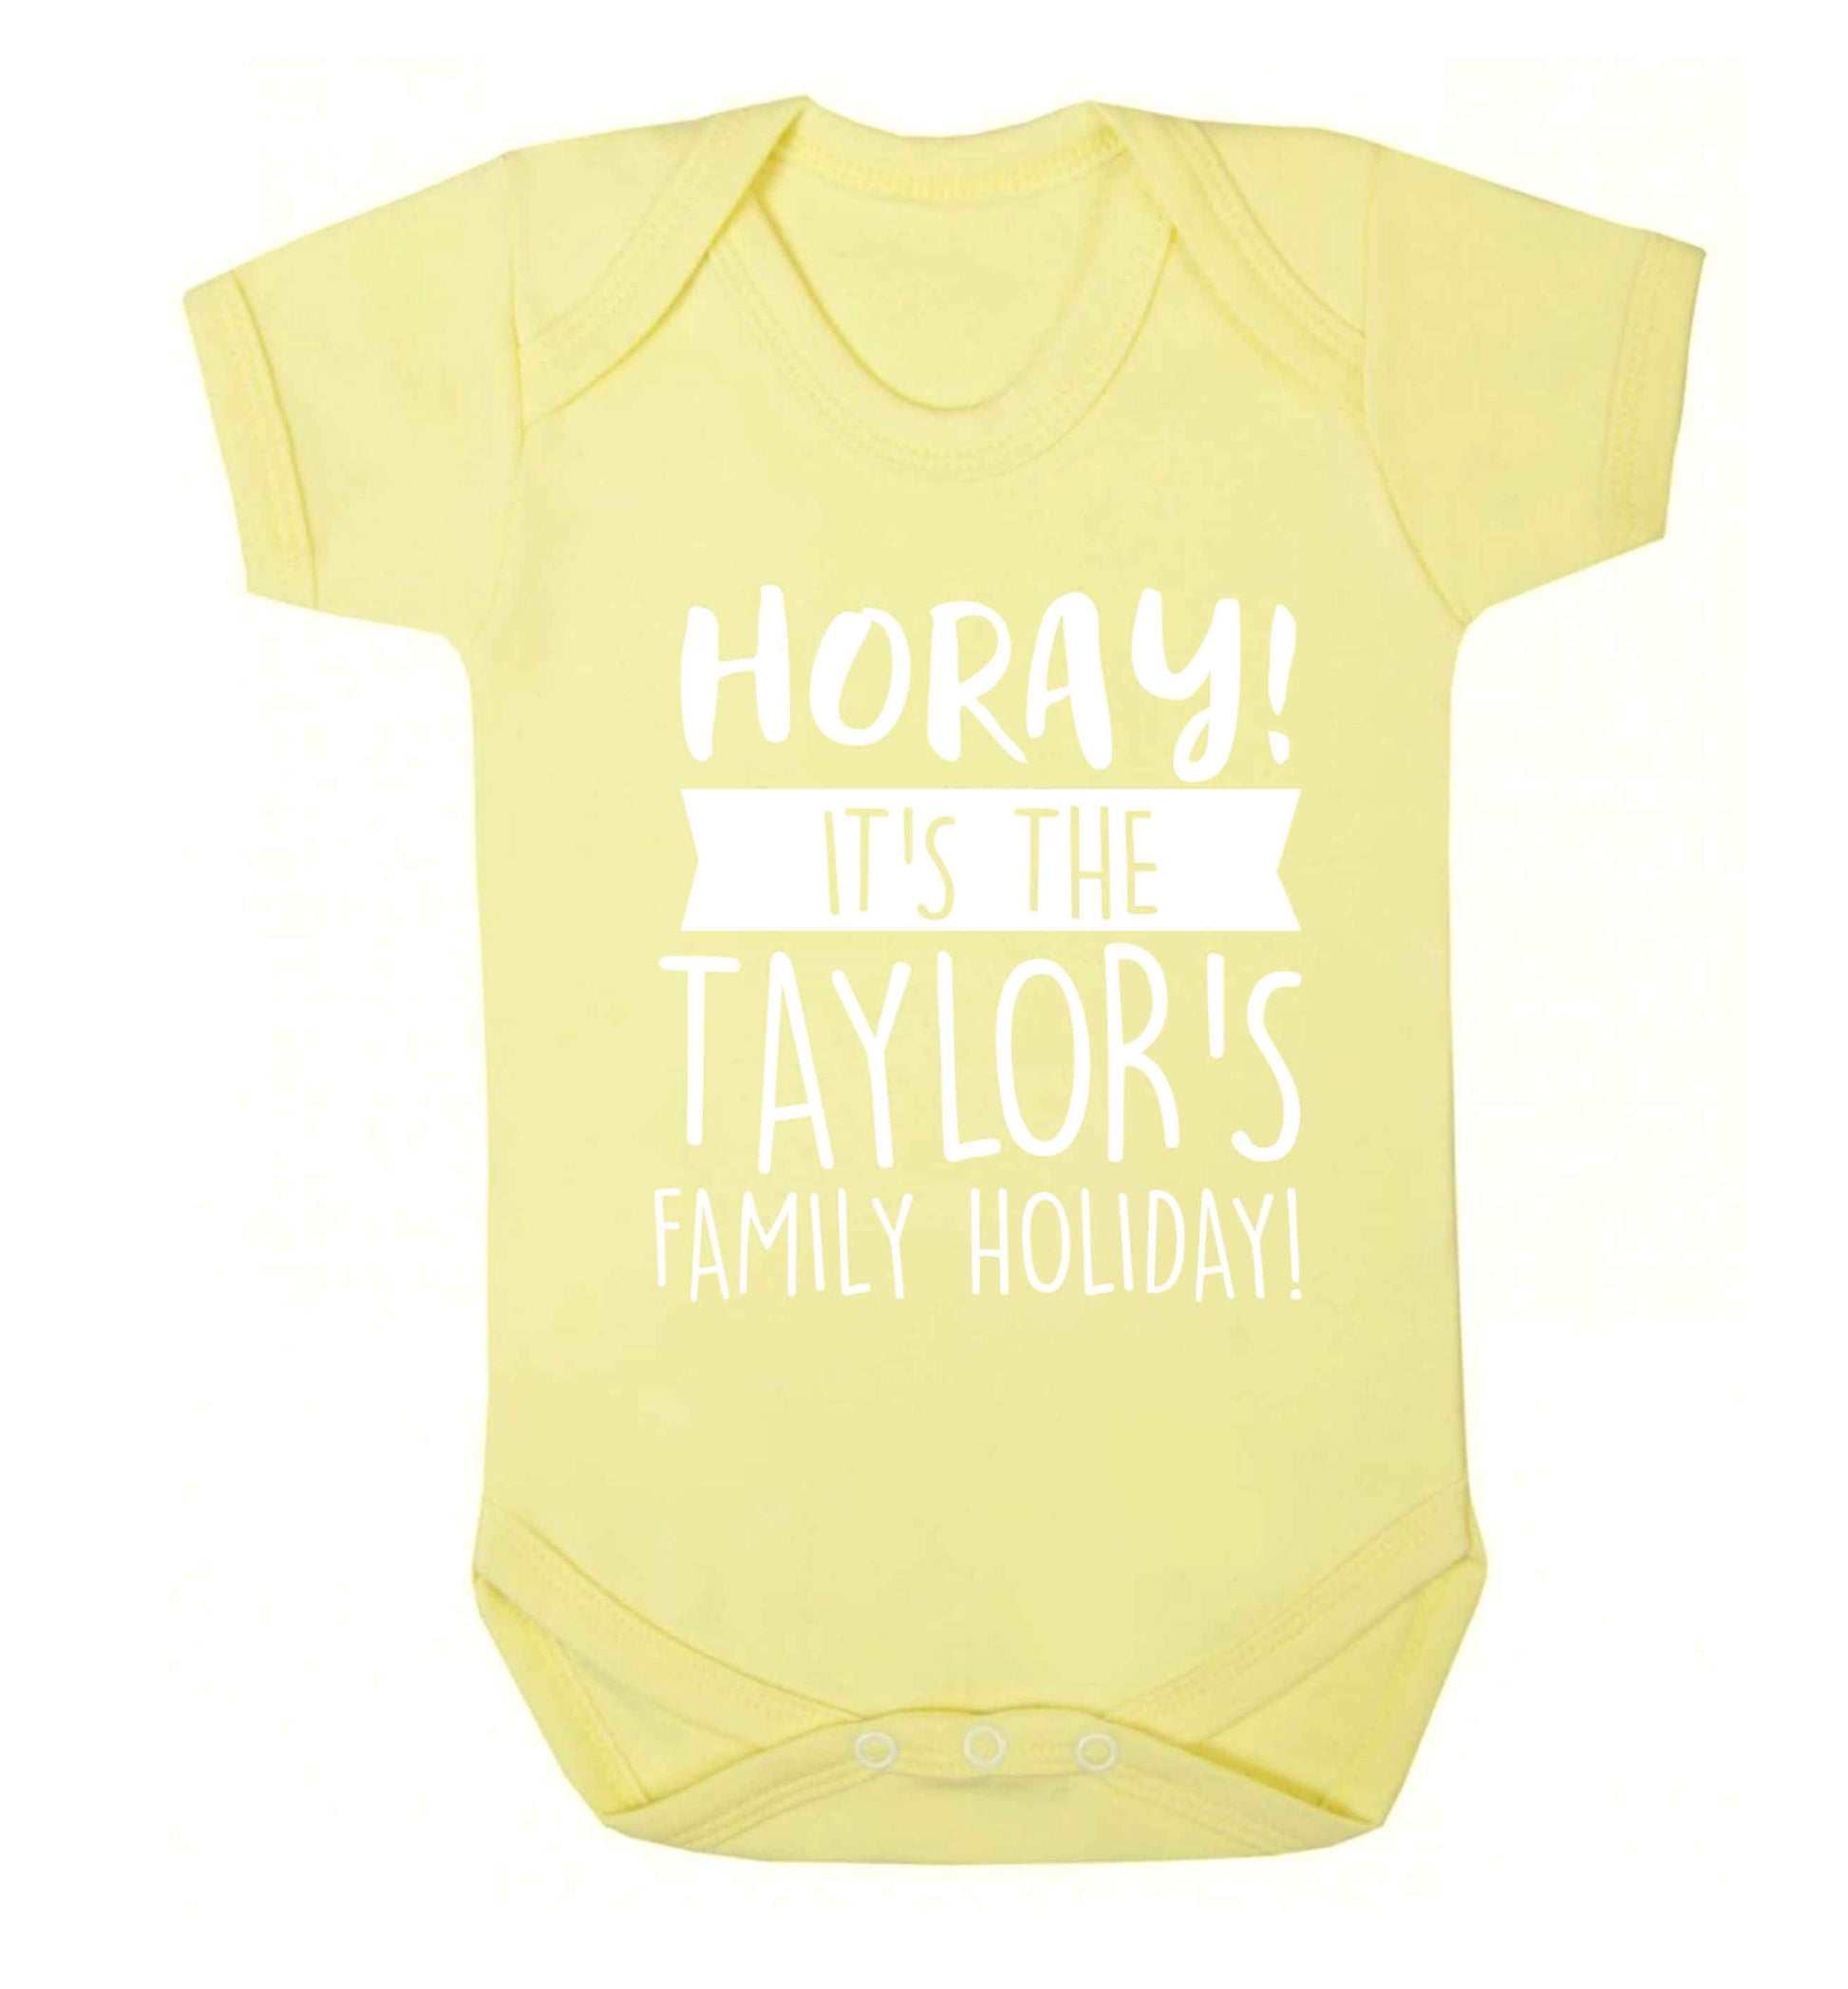 Horay it's the Taylor's family holiday! personalised item Baby Vest pale yellow 18-24 months